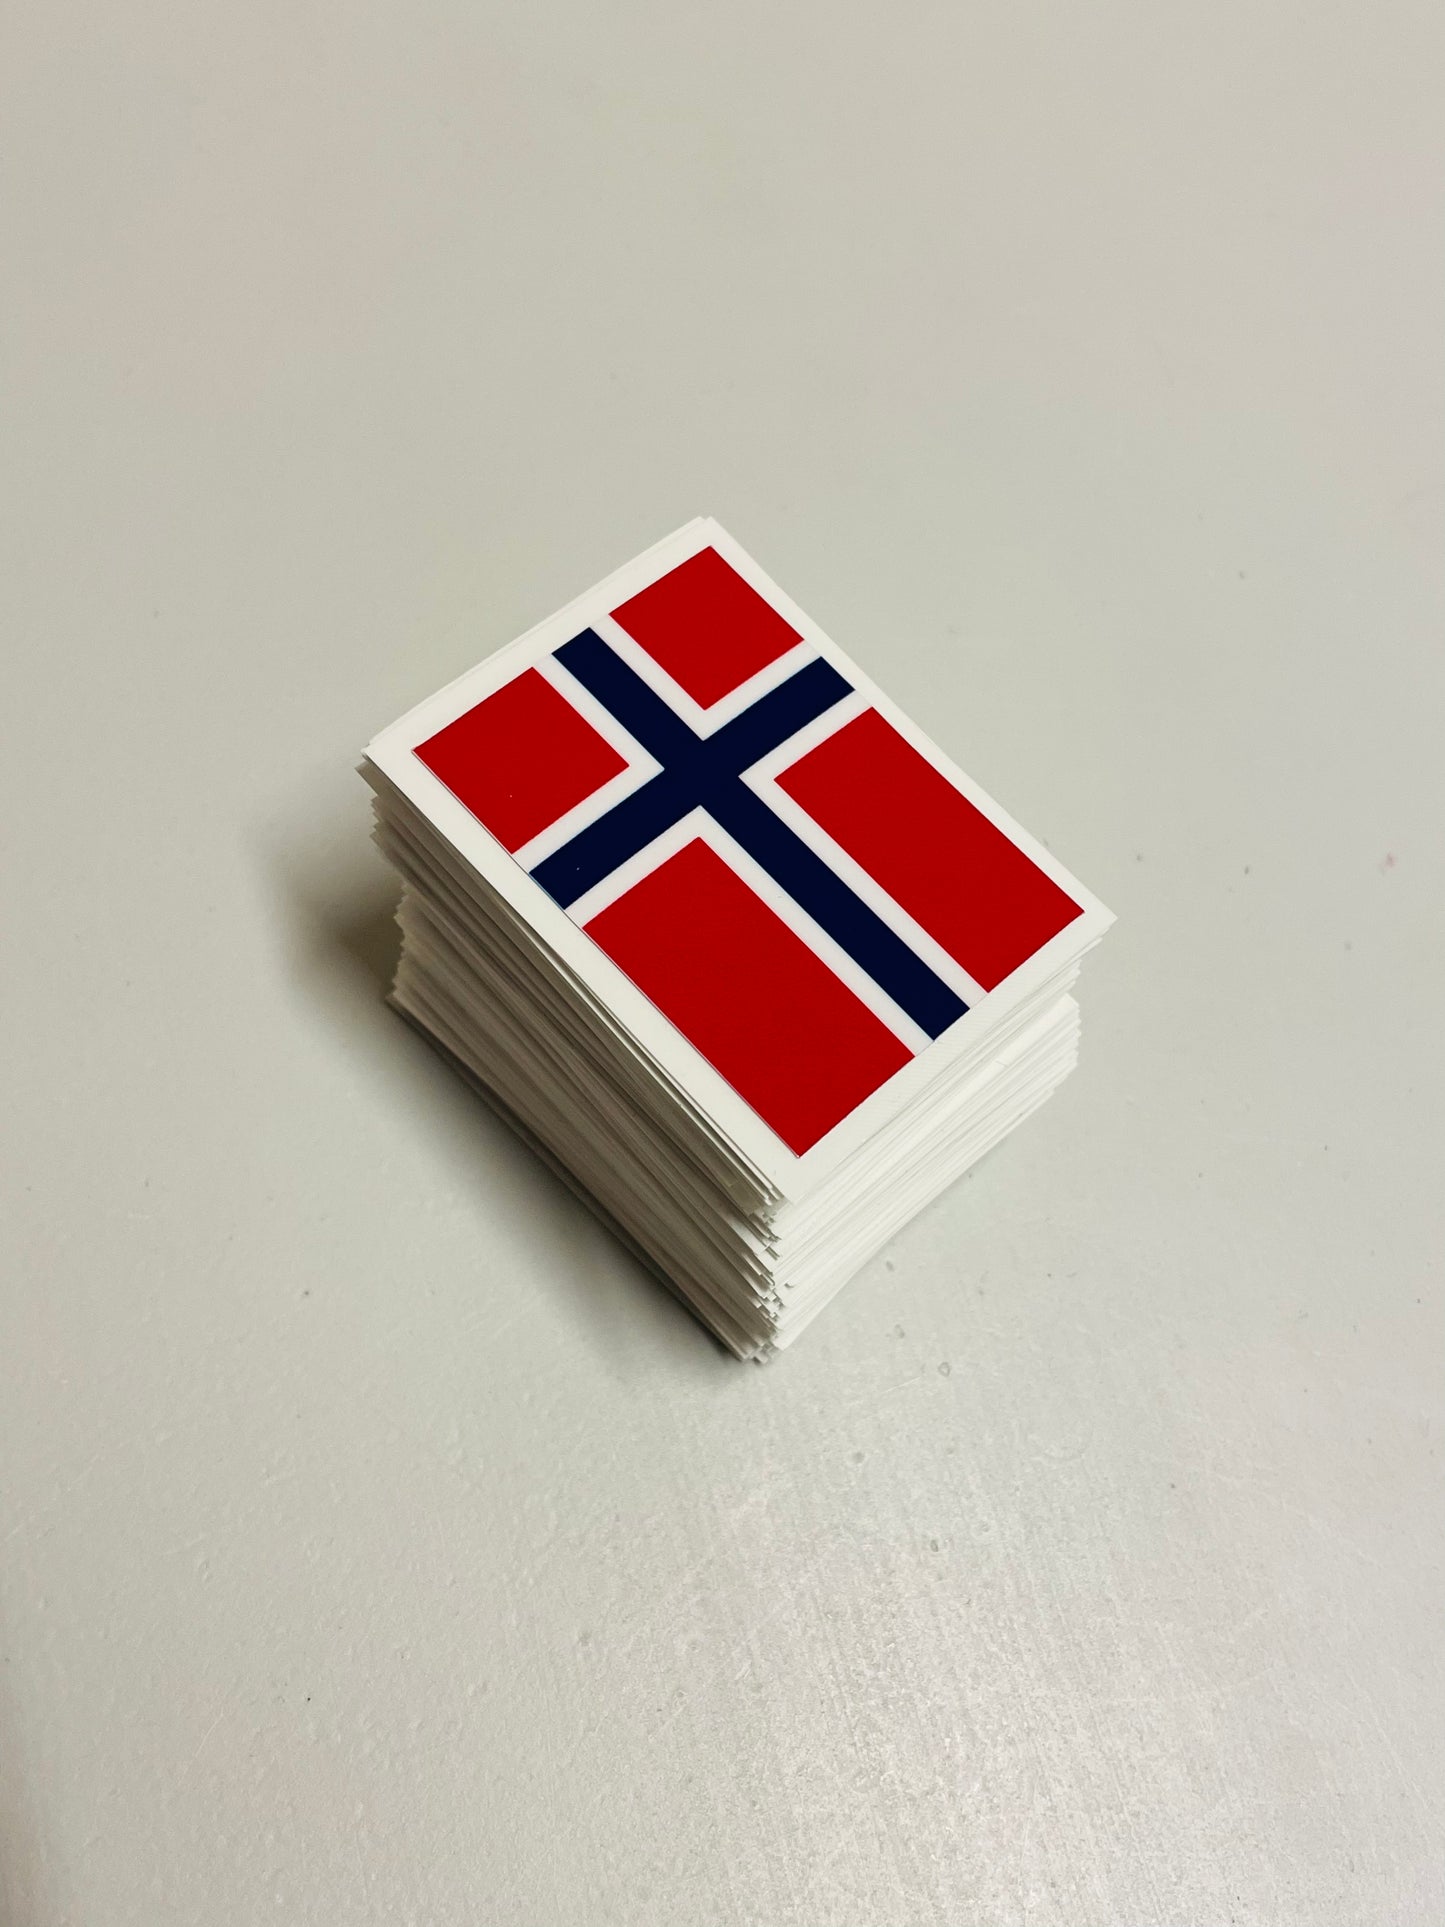 Norgesflagg